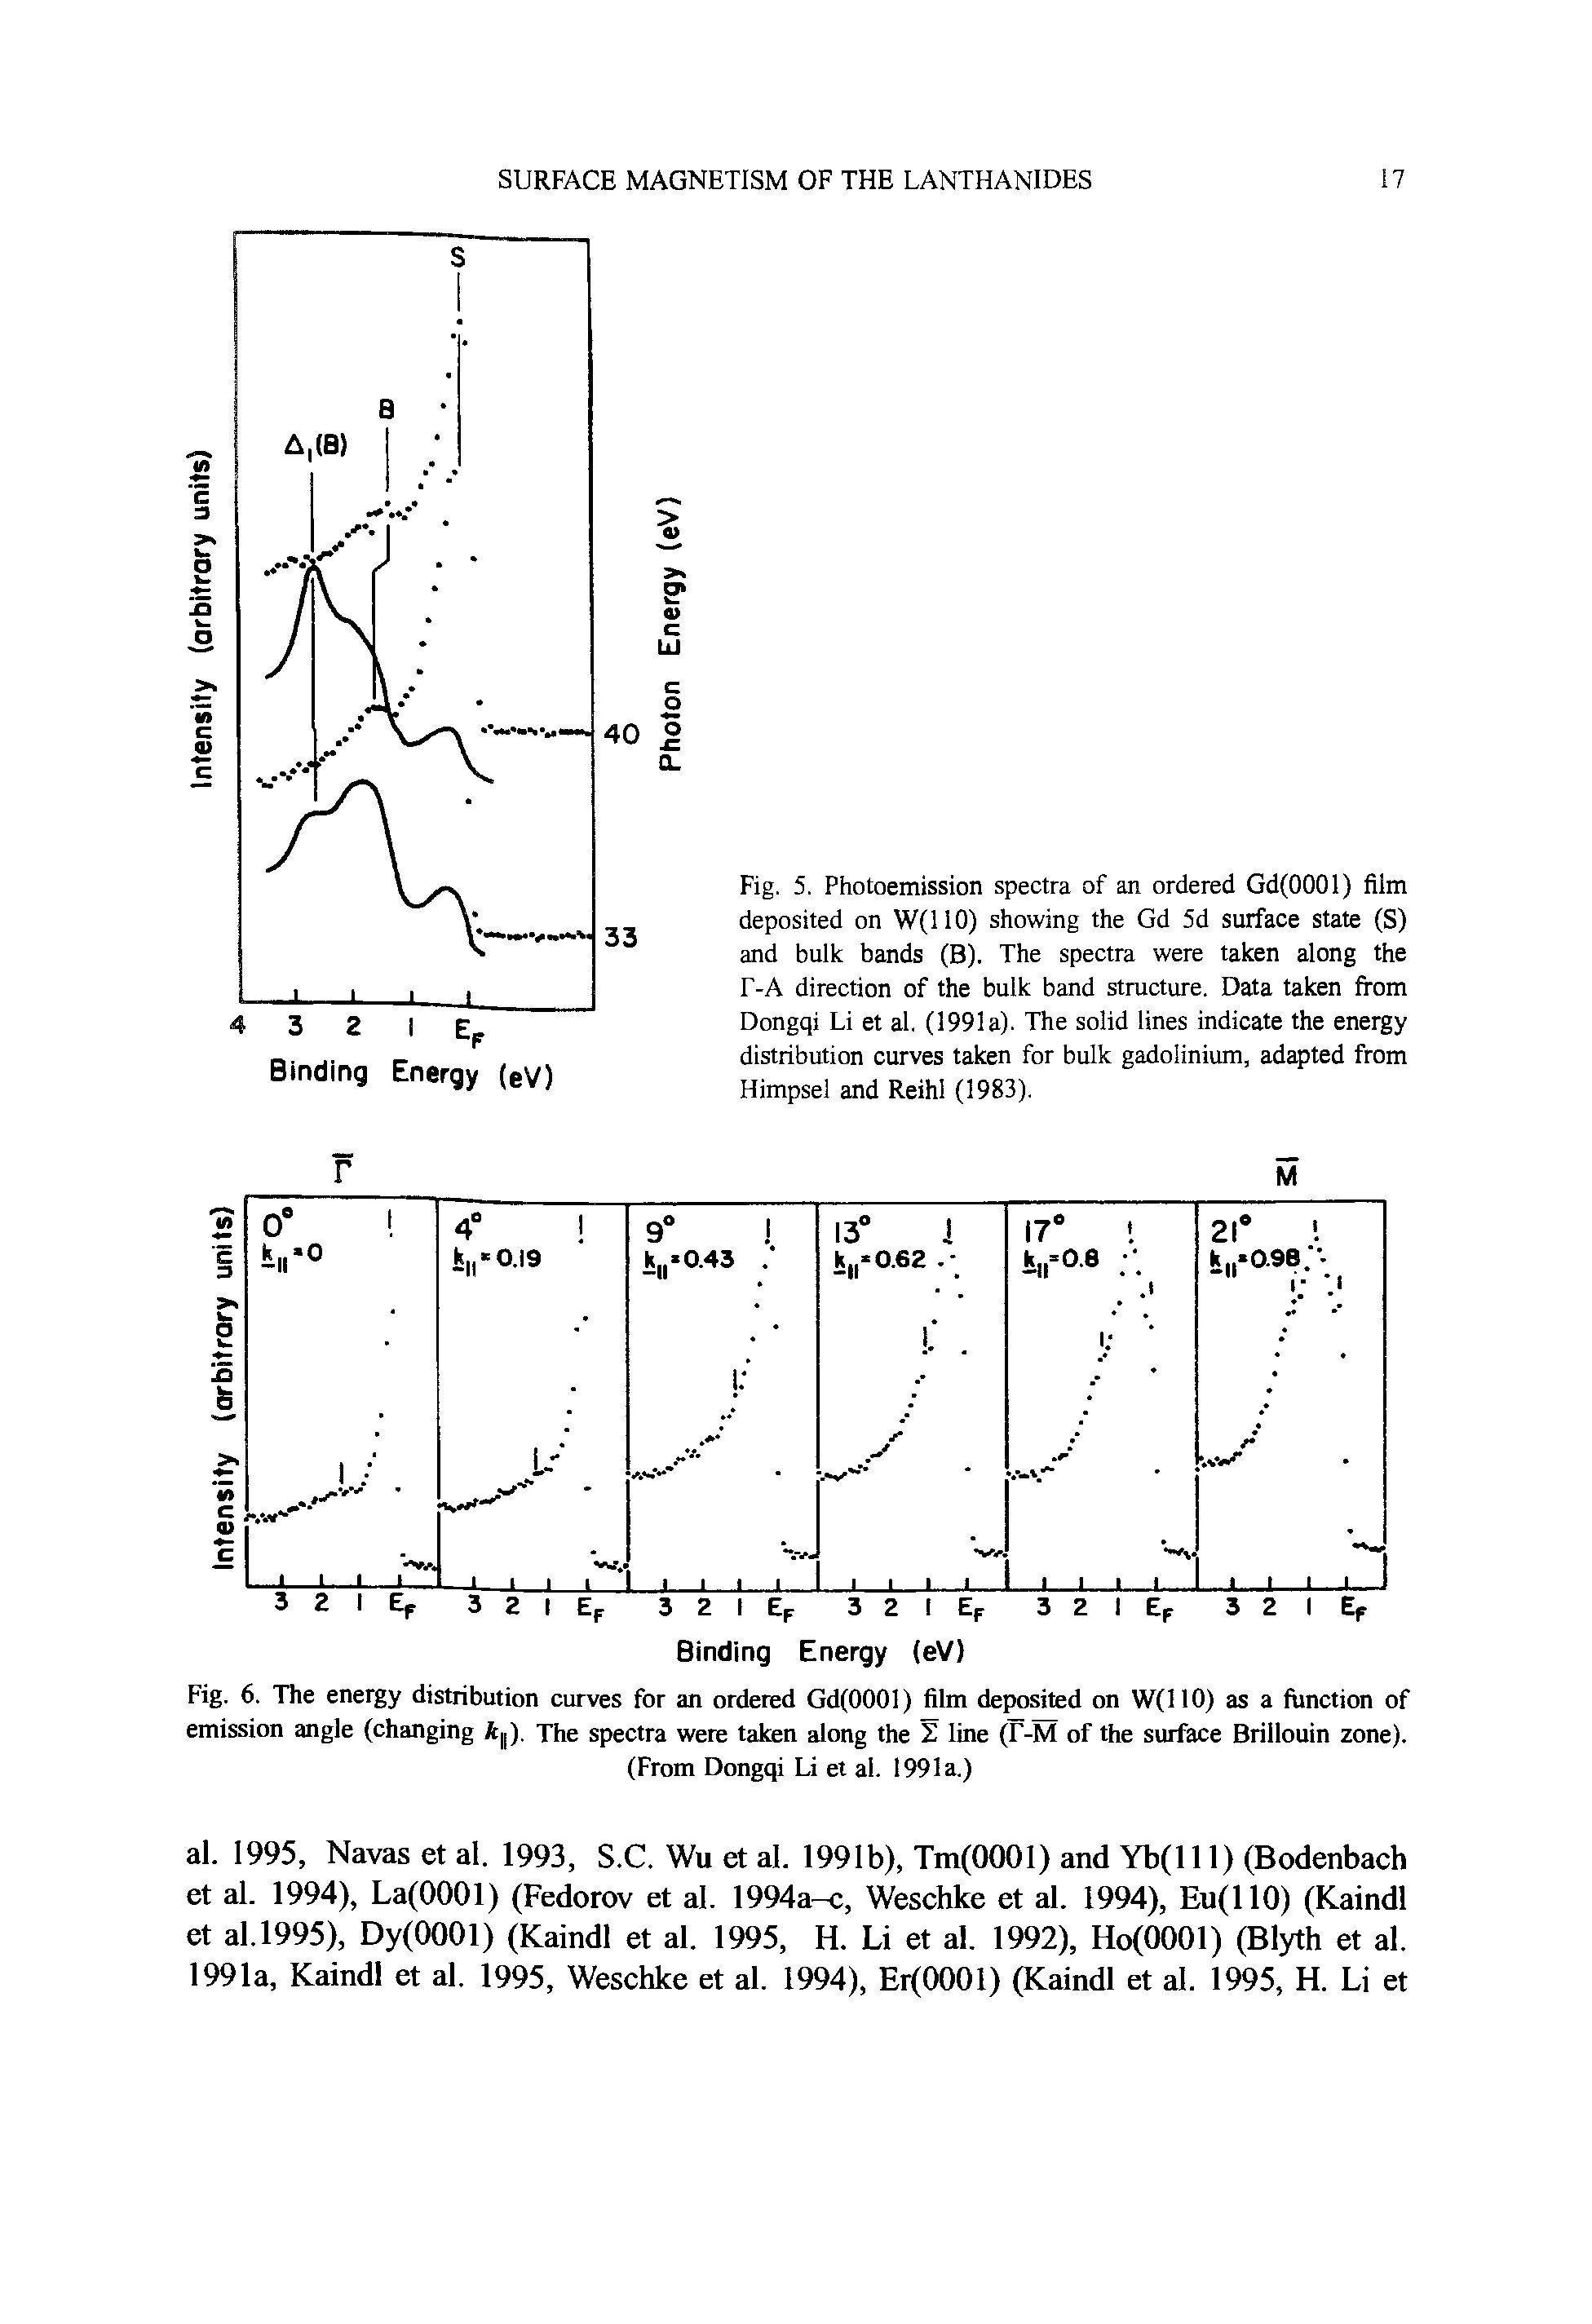 Fig. 5. Photoemission spectra of an ordered Gd(OOOl) film deposited on W(llO) showing the Gd 5d surface state (S) and bulk bands (B). The spectra were taken along the T-A direction of the bulk band structure. Data taken from Dongqi Li et al. (1991a). The solid lines indicate the energy distribution curves taken for bulk gadolinium, adapted from Himpsel and Reihl (1983).